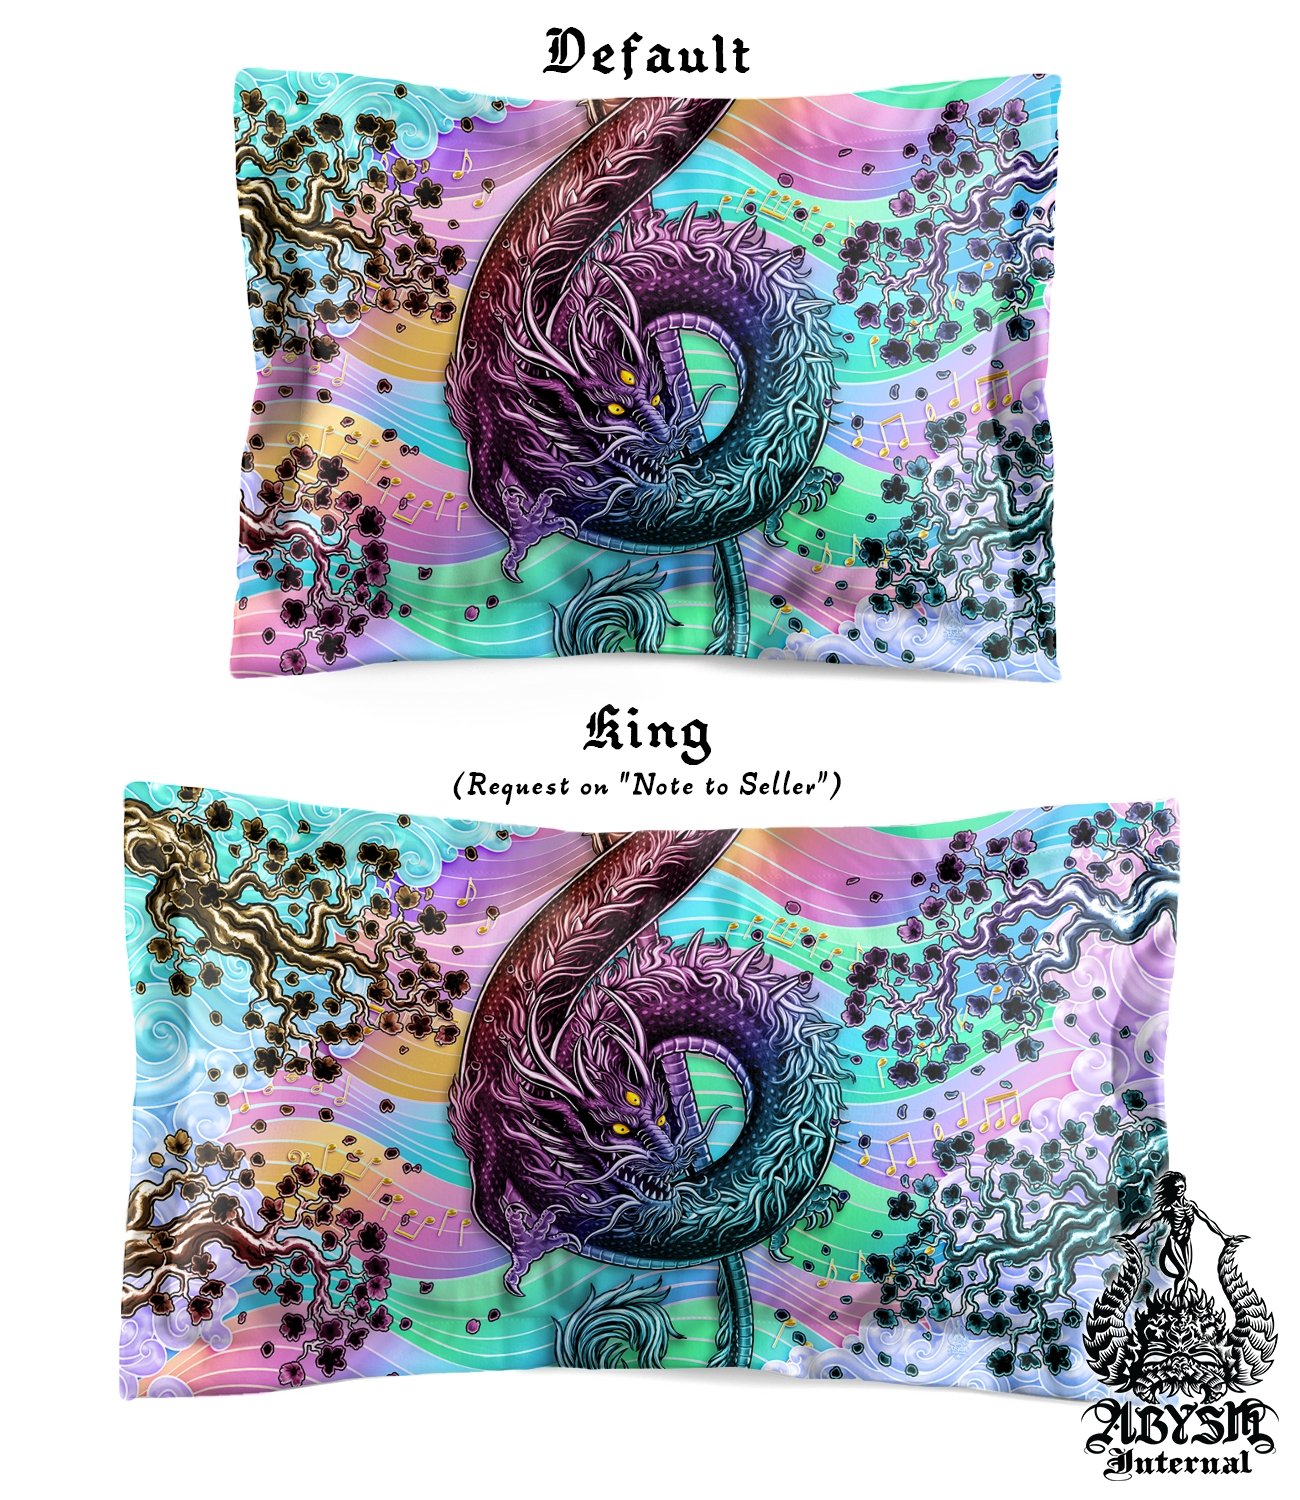 Pastel Dragon Bedding Set, Comforter and Duvet, Music Bed Cover, Kawaii Gamer Bedroom Decor, King, Queen and Twin Size - Black, Punk Art - Abysm Internal